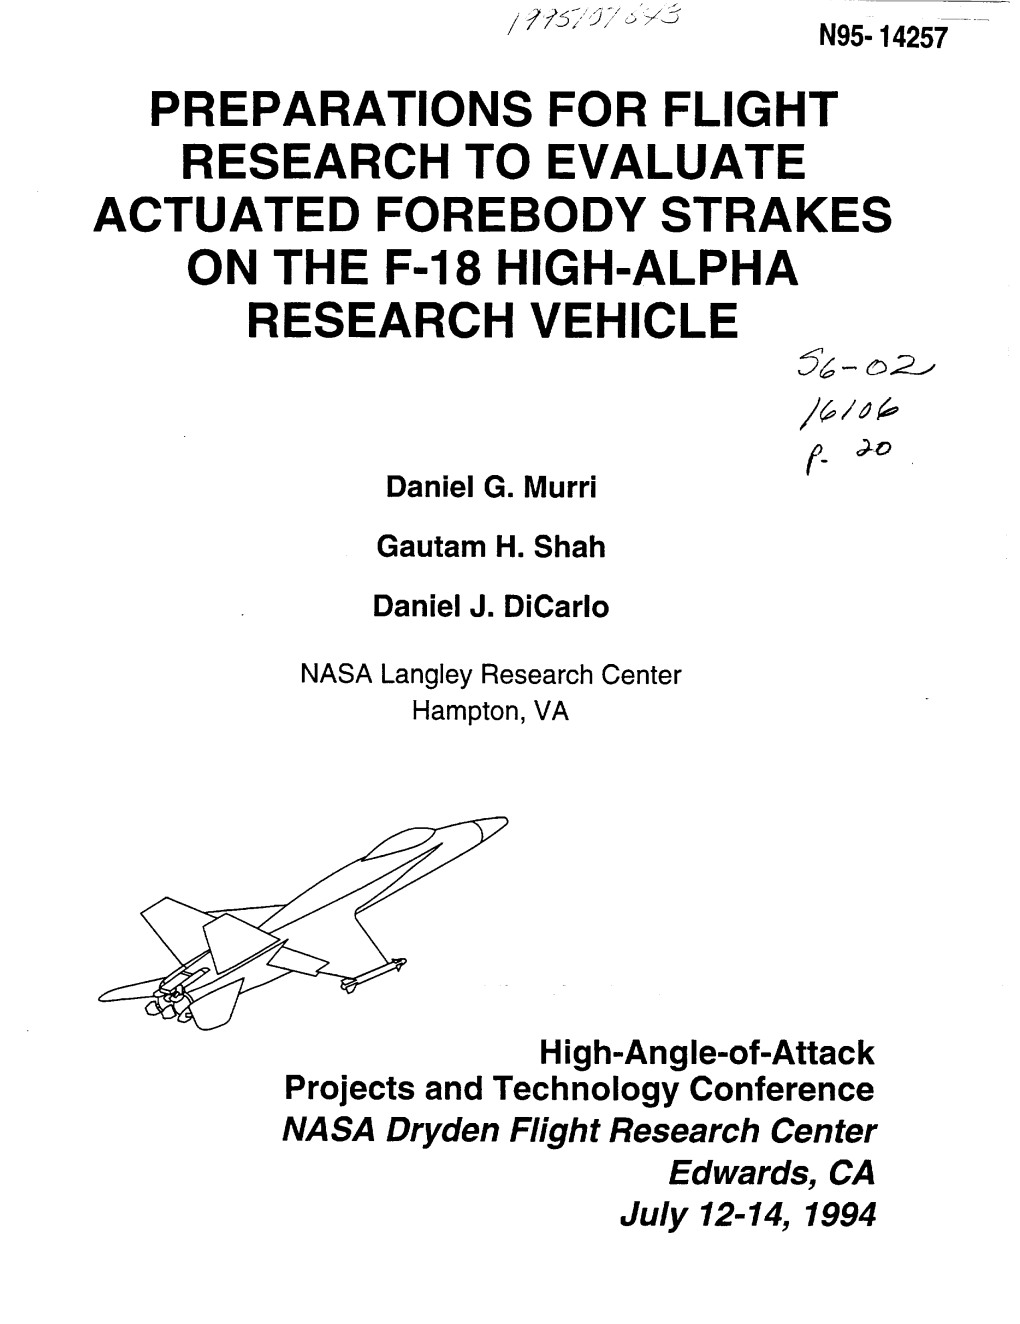 Preparations for Flight Research to Evaluate Actuated Forebody Strakes on the F-18 High-Alpha Research Vehicle